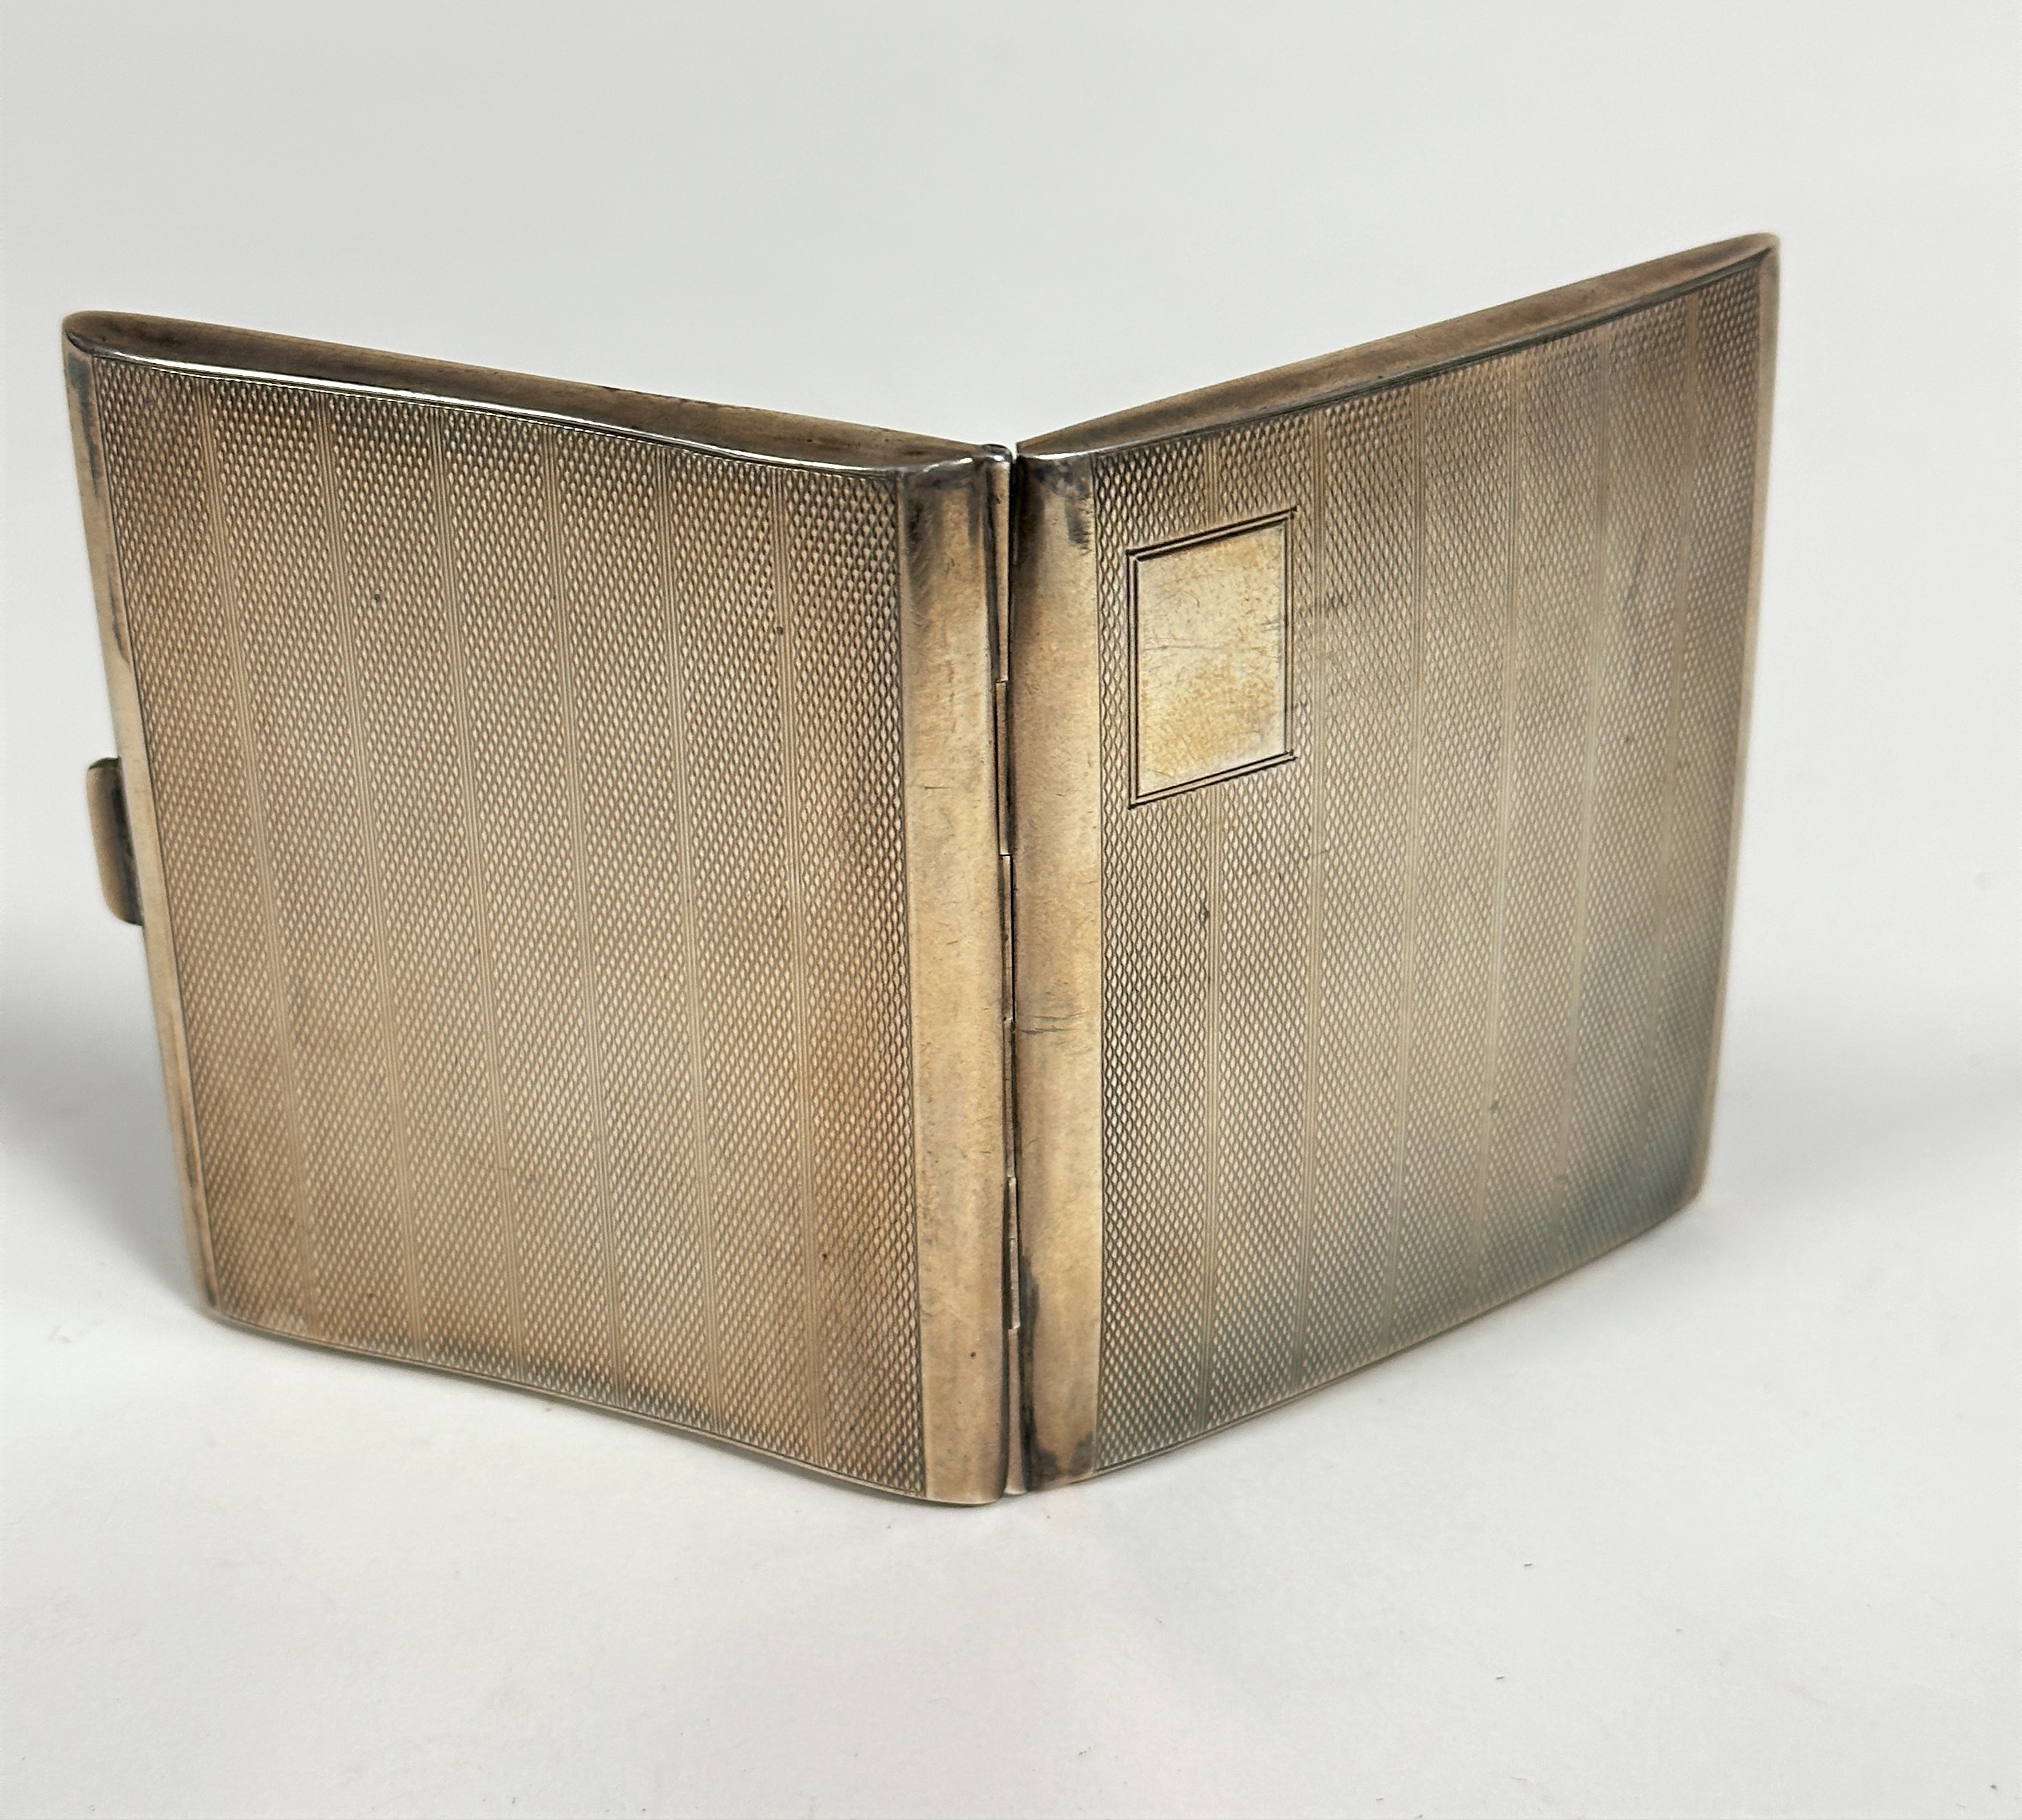 A Birmingham 1929 silver presentation cigarette case with engine turned decoration with engraved